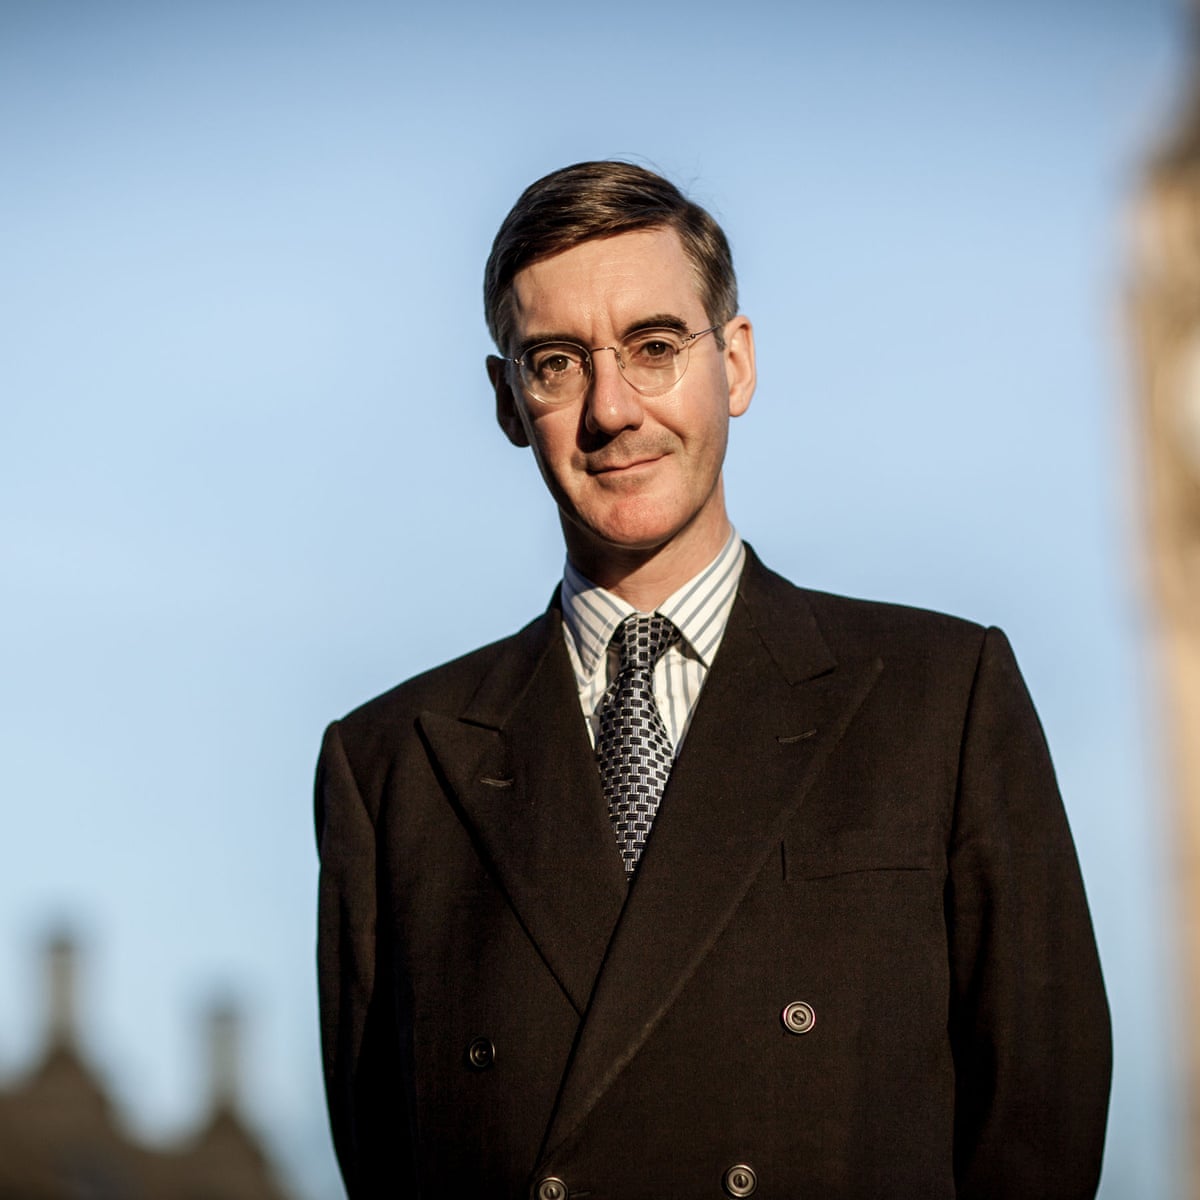 Brits still love a good toff. The ubiquity of Jacob Rees-Mogg proves it |  Conservatives | The Guardian